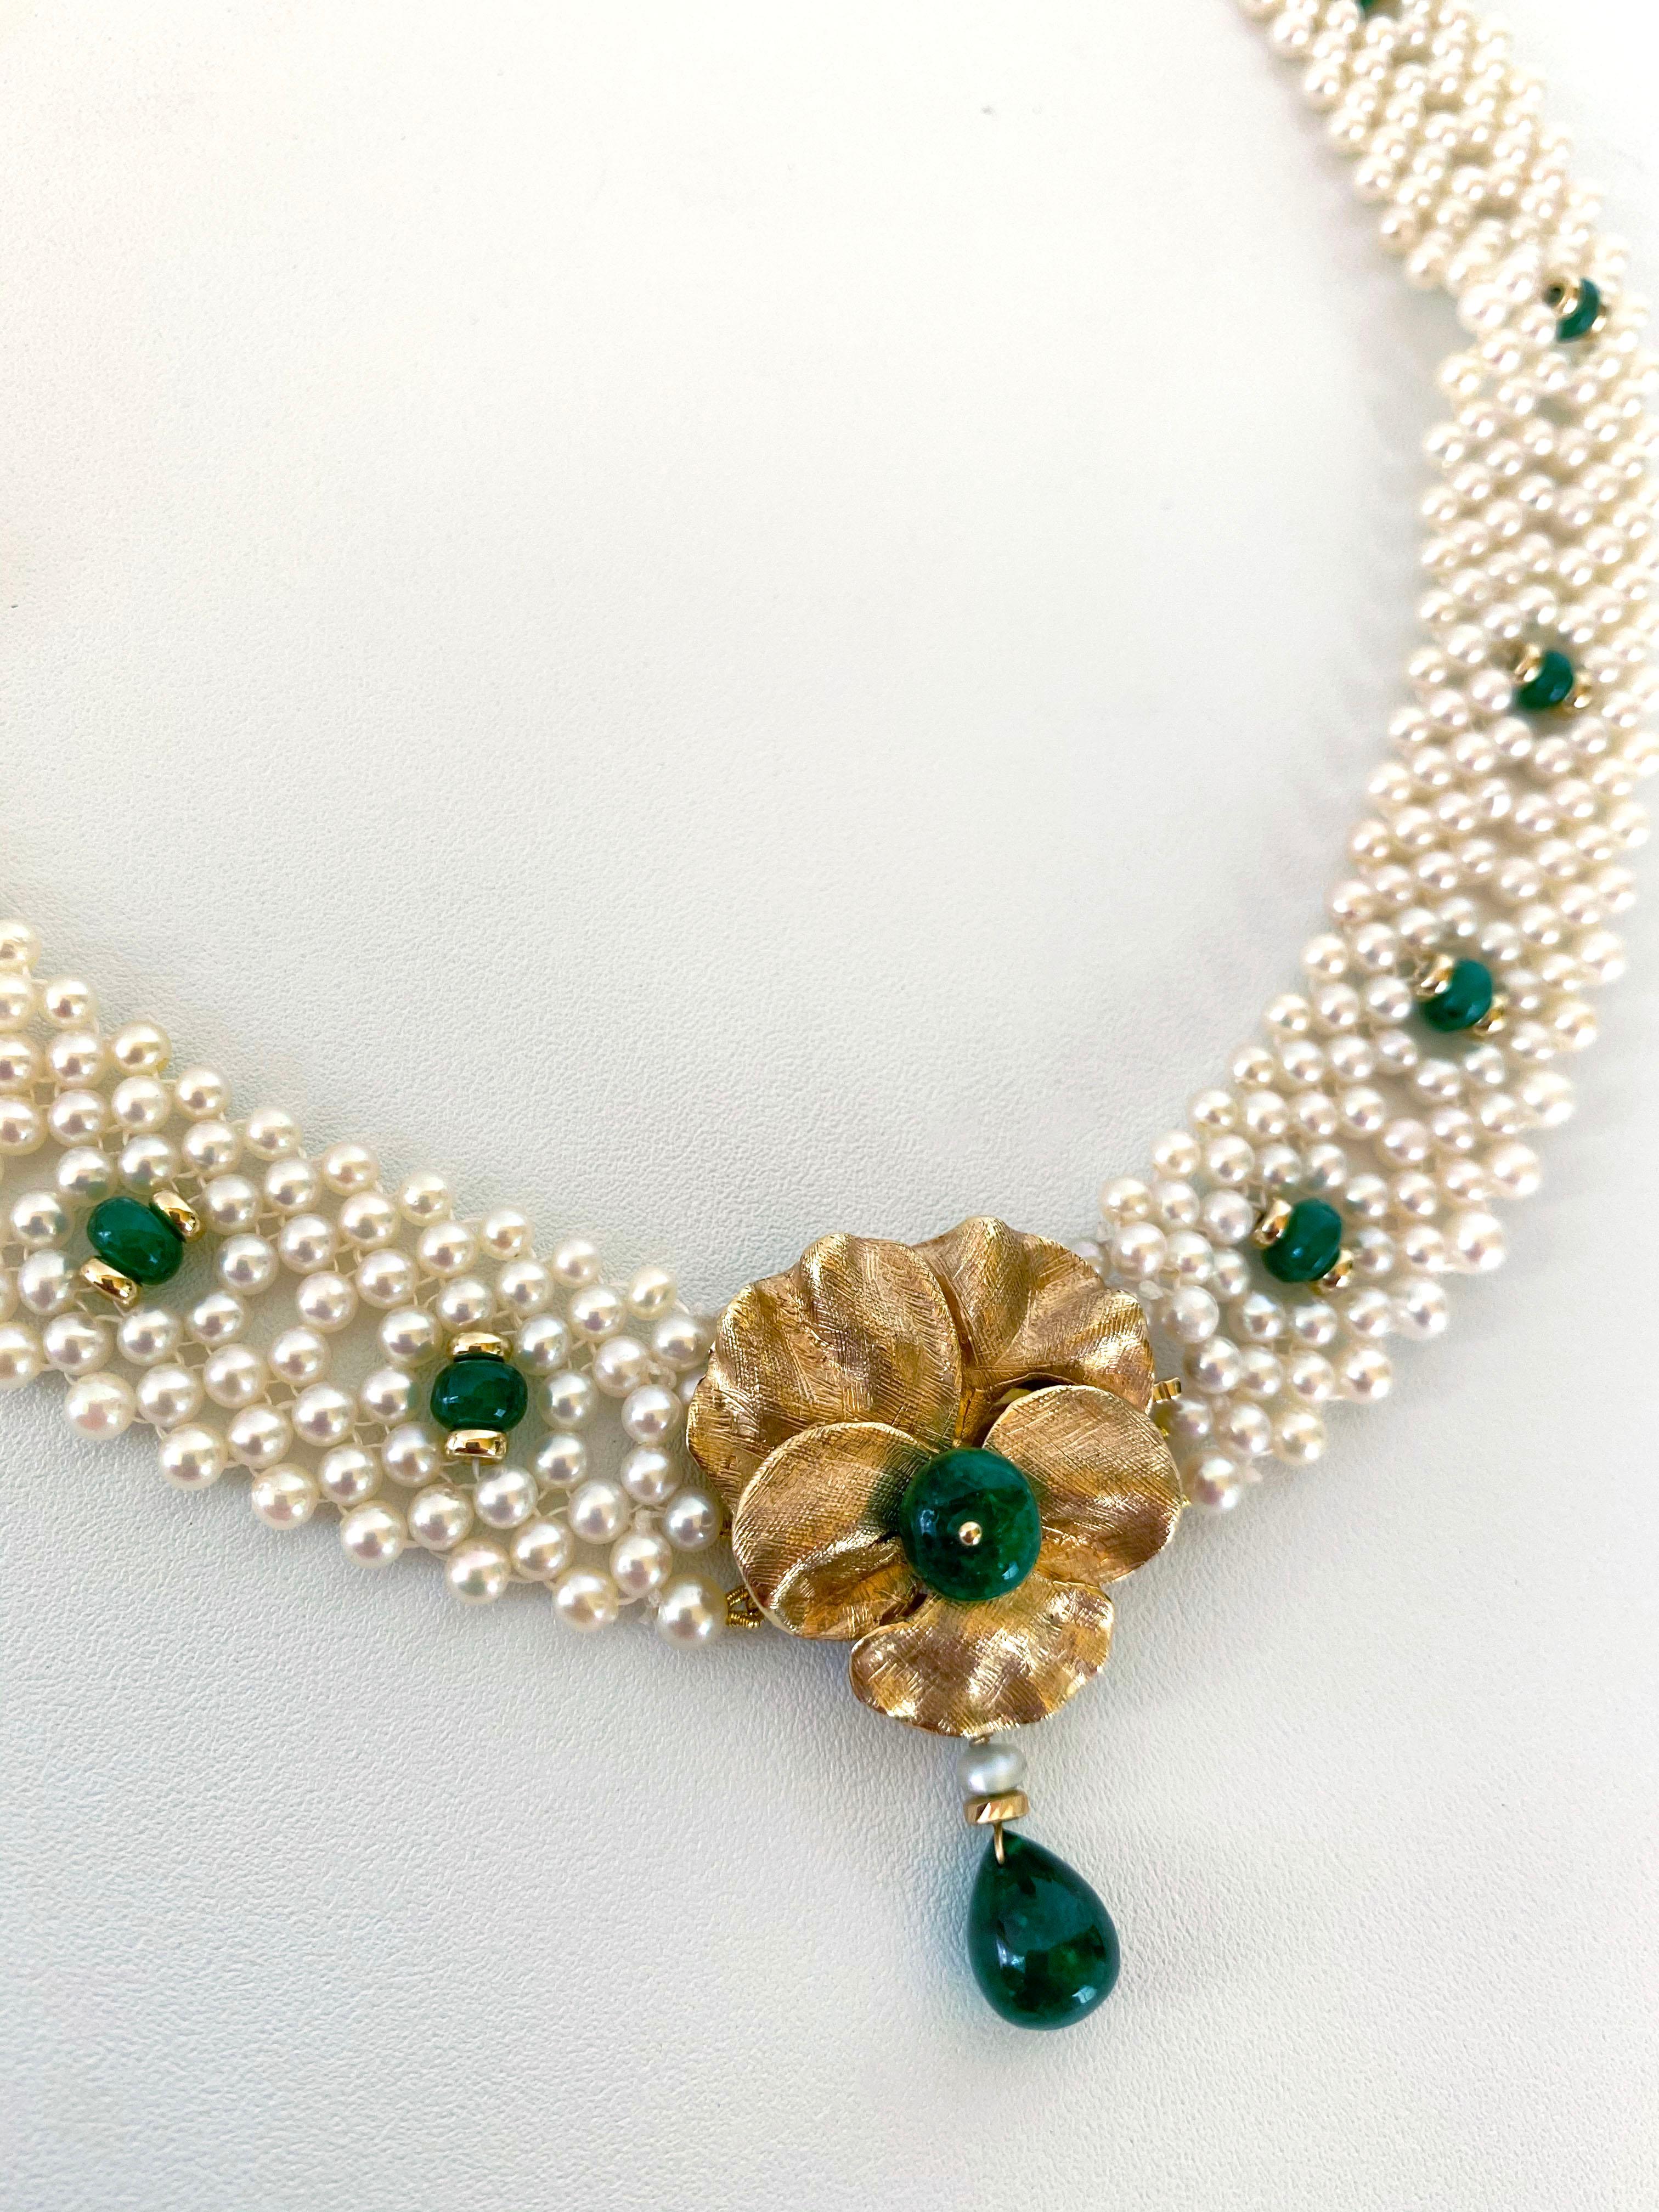 Marina J Woven Pearl & Emerald Infinity Necklace with Vintage 14k Centerpiece 6